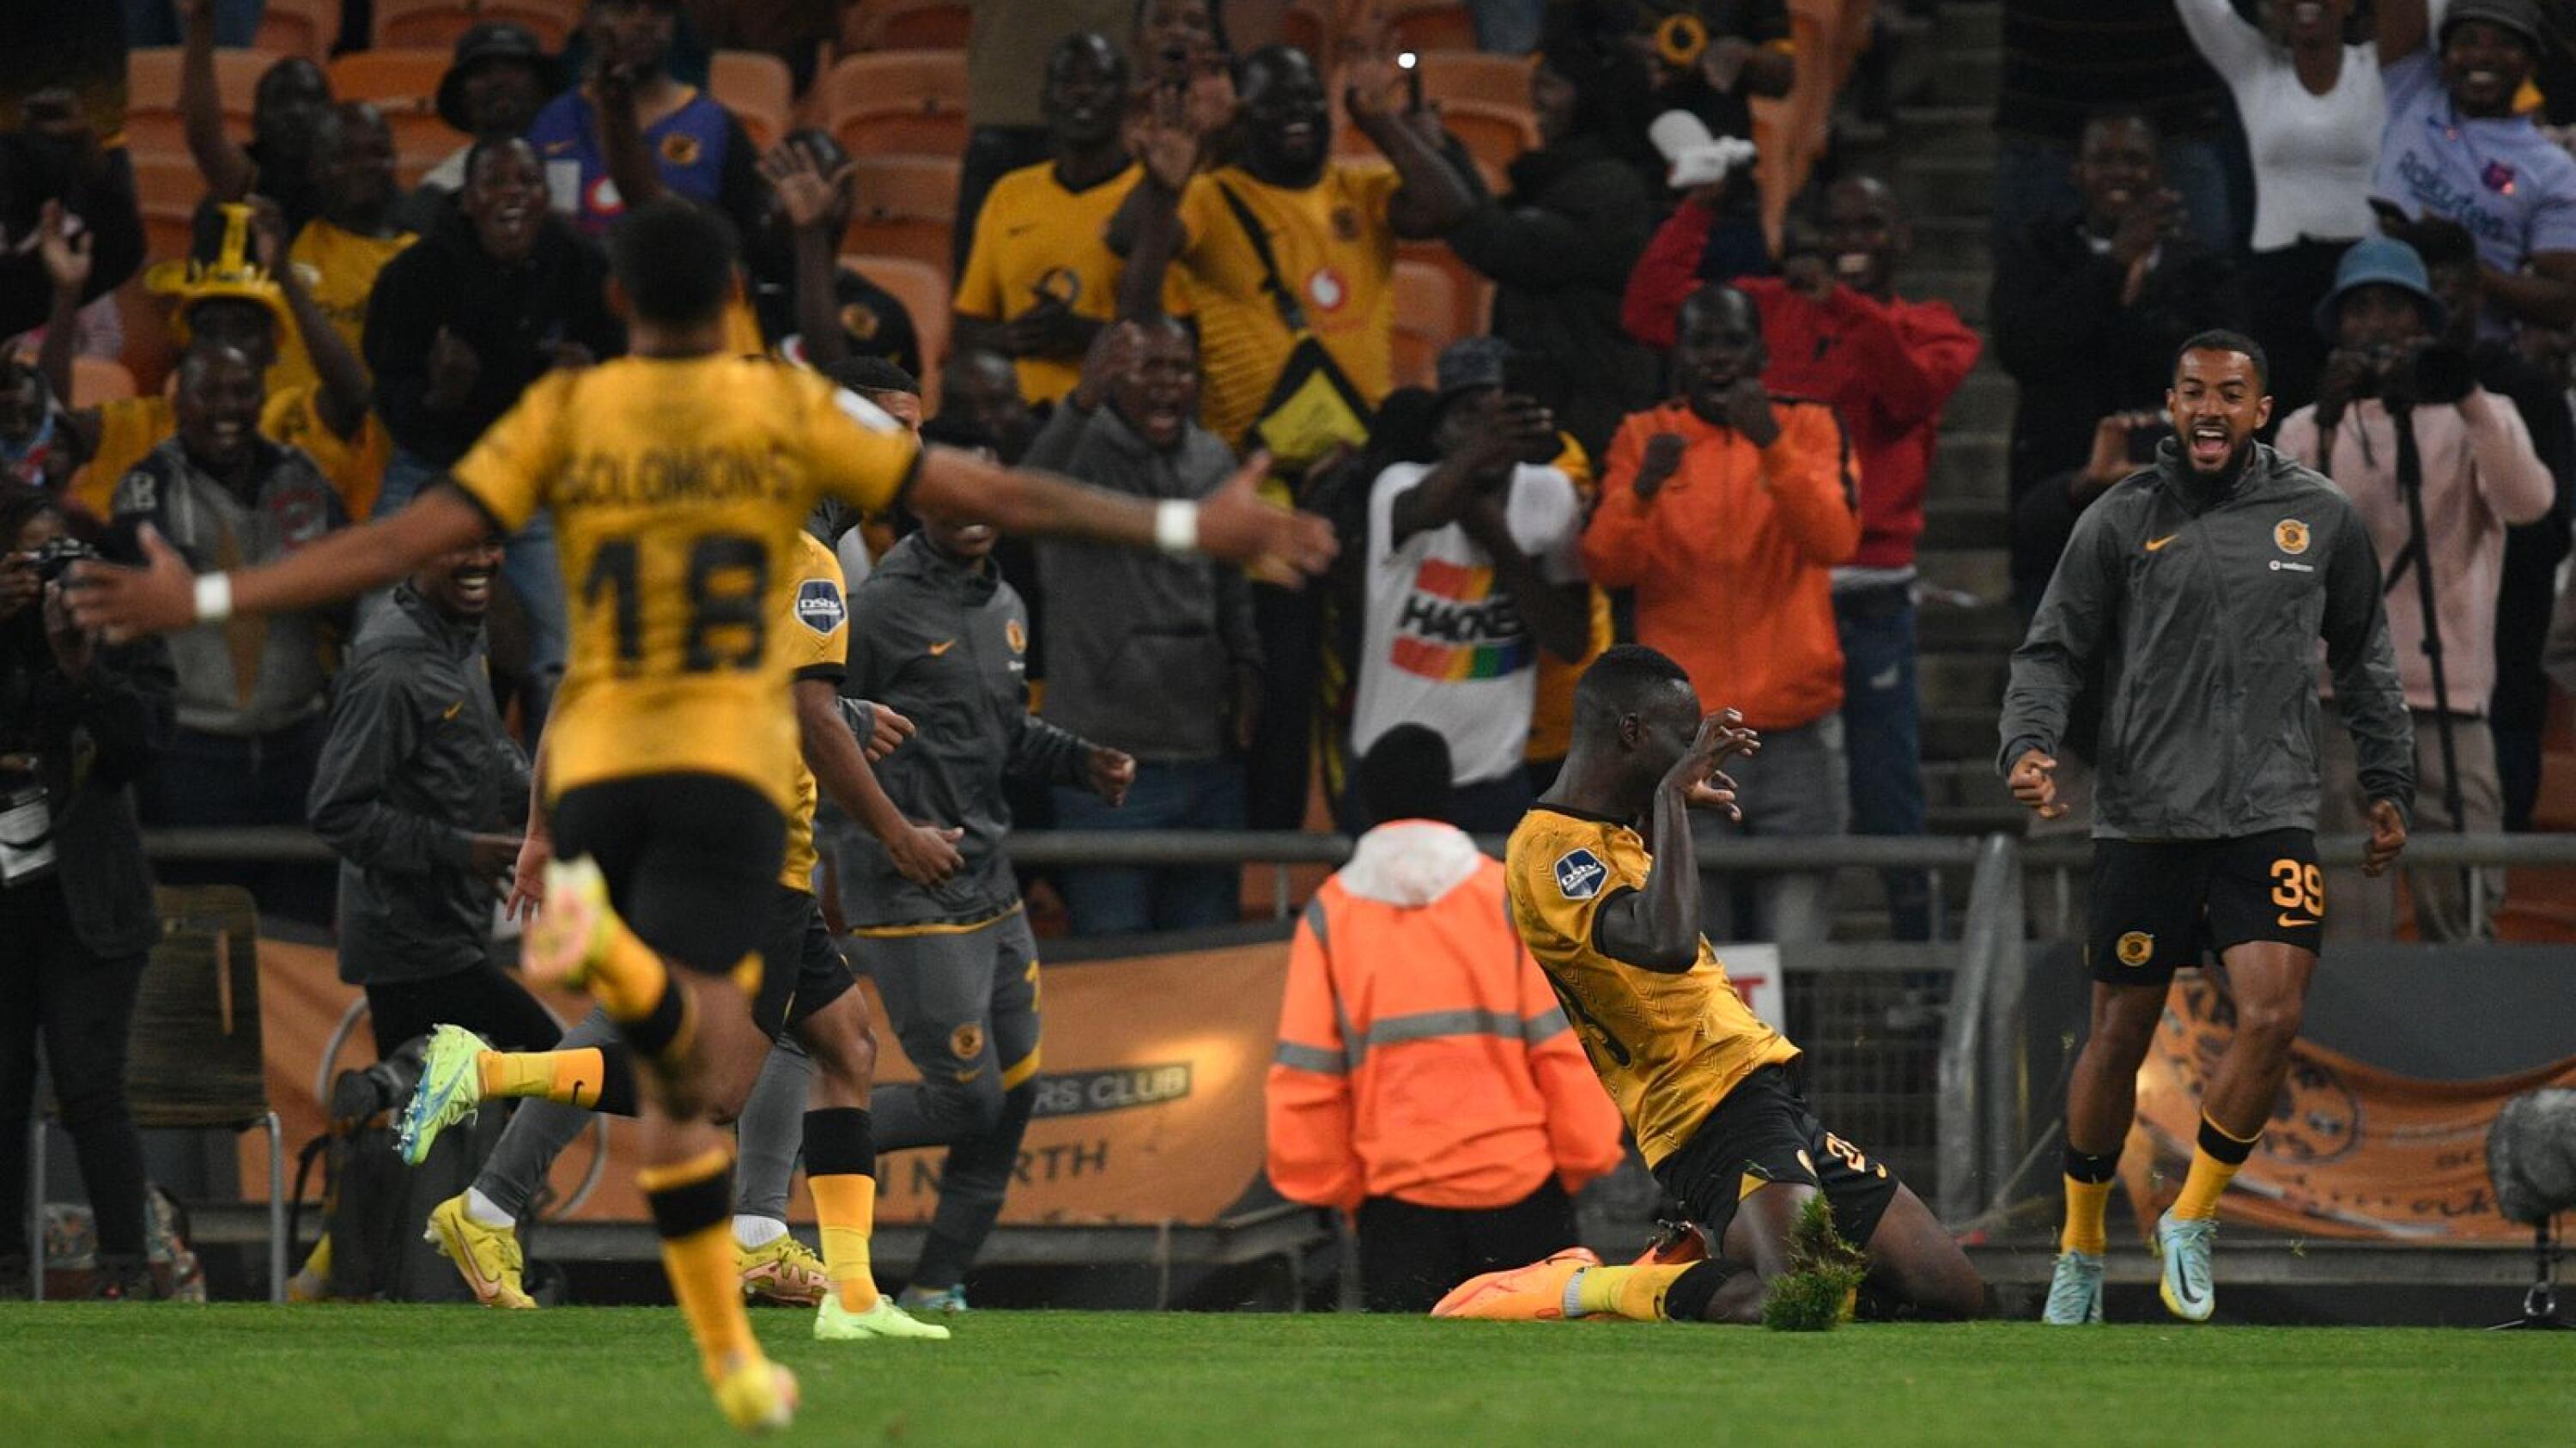 Caleb Bimenyimana of Kaizer Chiefs celebrates with teammates after scoring a goal during their DStv Premiership game against SuperSport United FC at FNB Stadium on Saturday